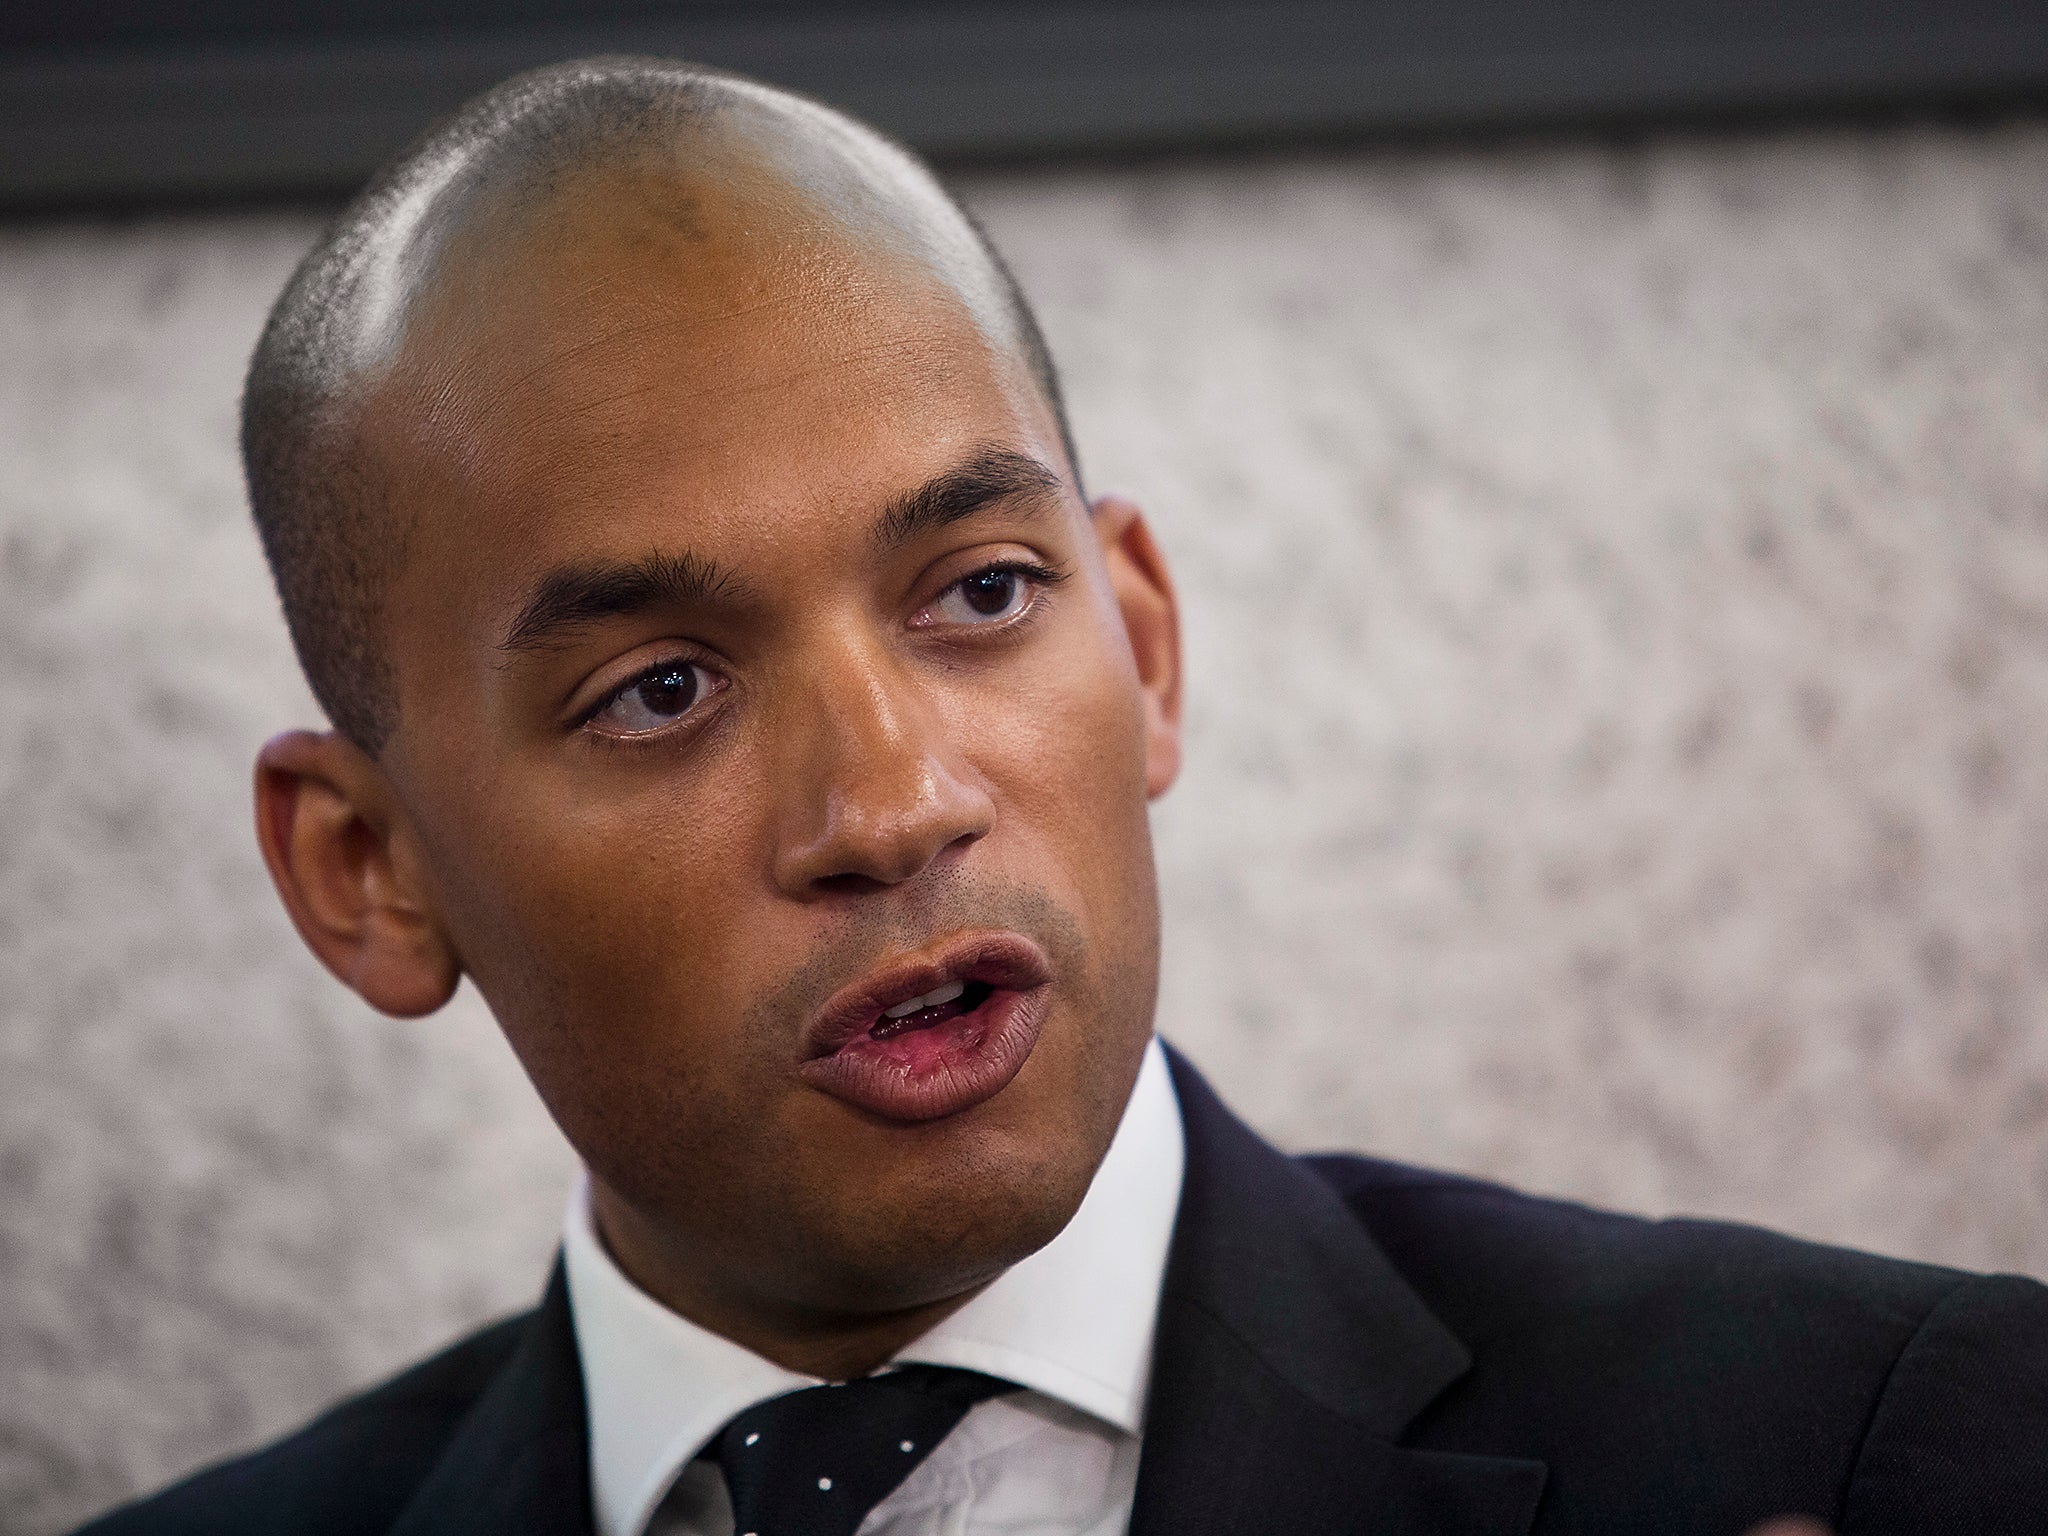 Chuka Umunna and other MPs will lead the alliance